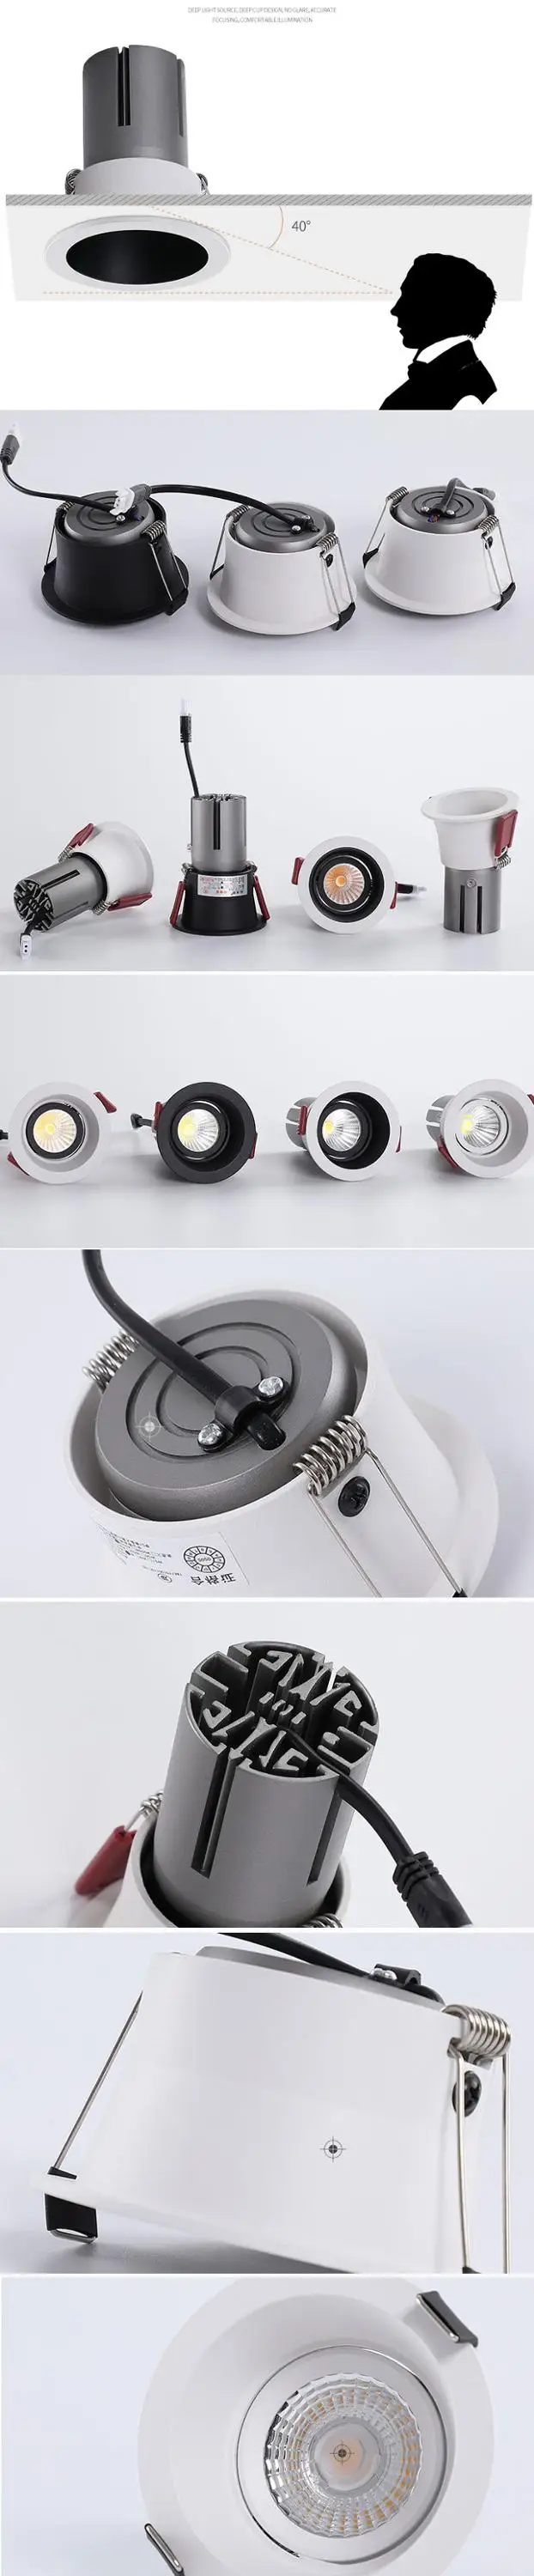 Round Dimmable surface mounted Recessed 12w LED Downlight,7w 15w 30w 40w indoor led down lights